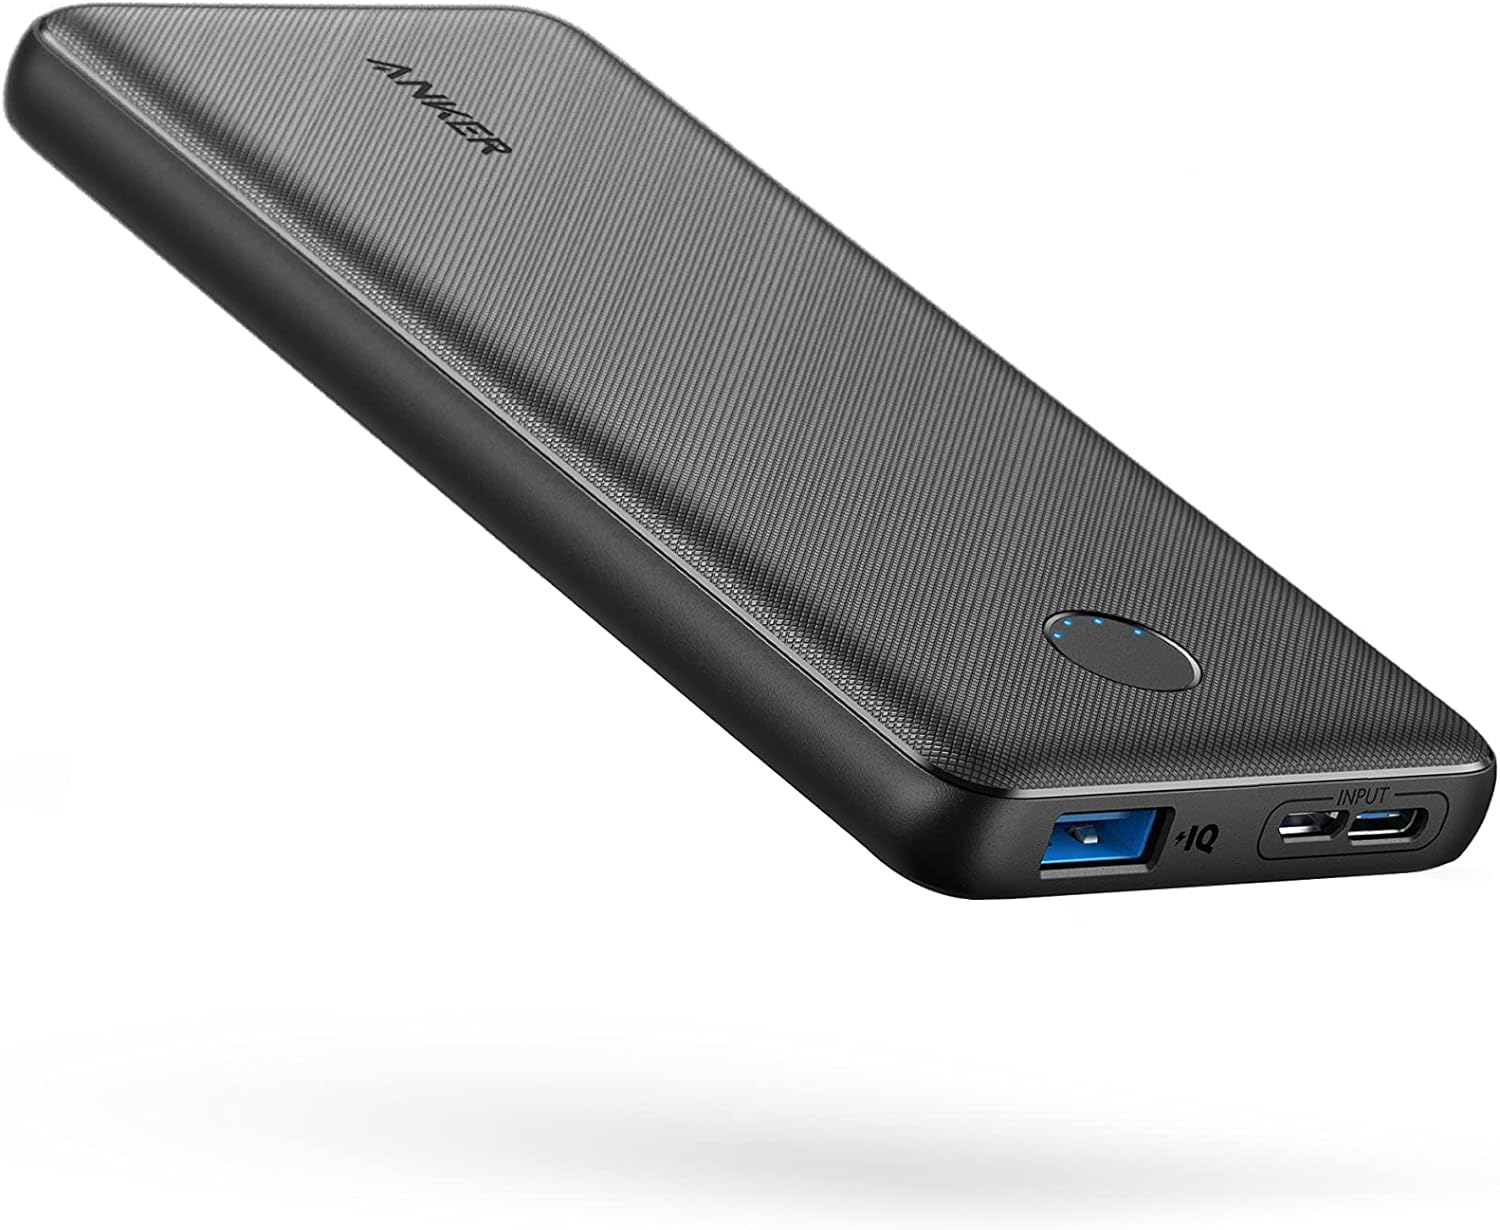 Anker Portable Charger, Power Bank, 10,000 mAh Battery 